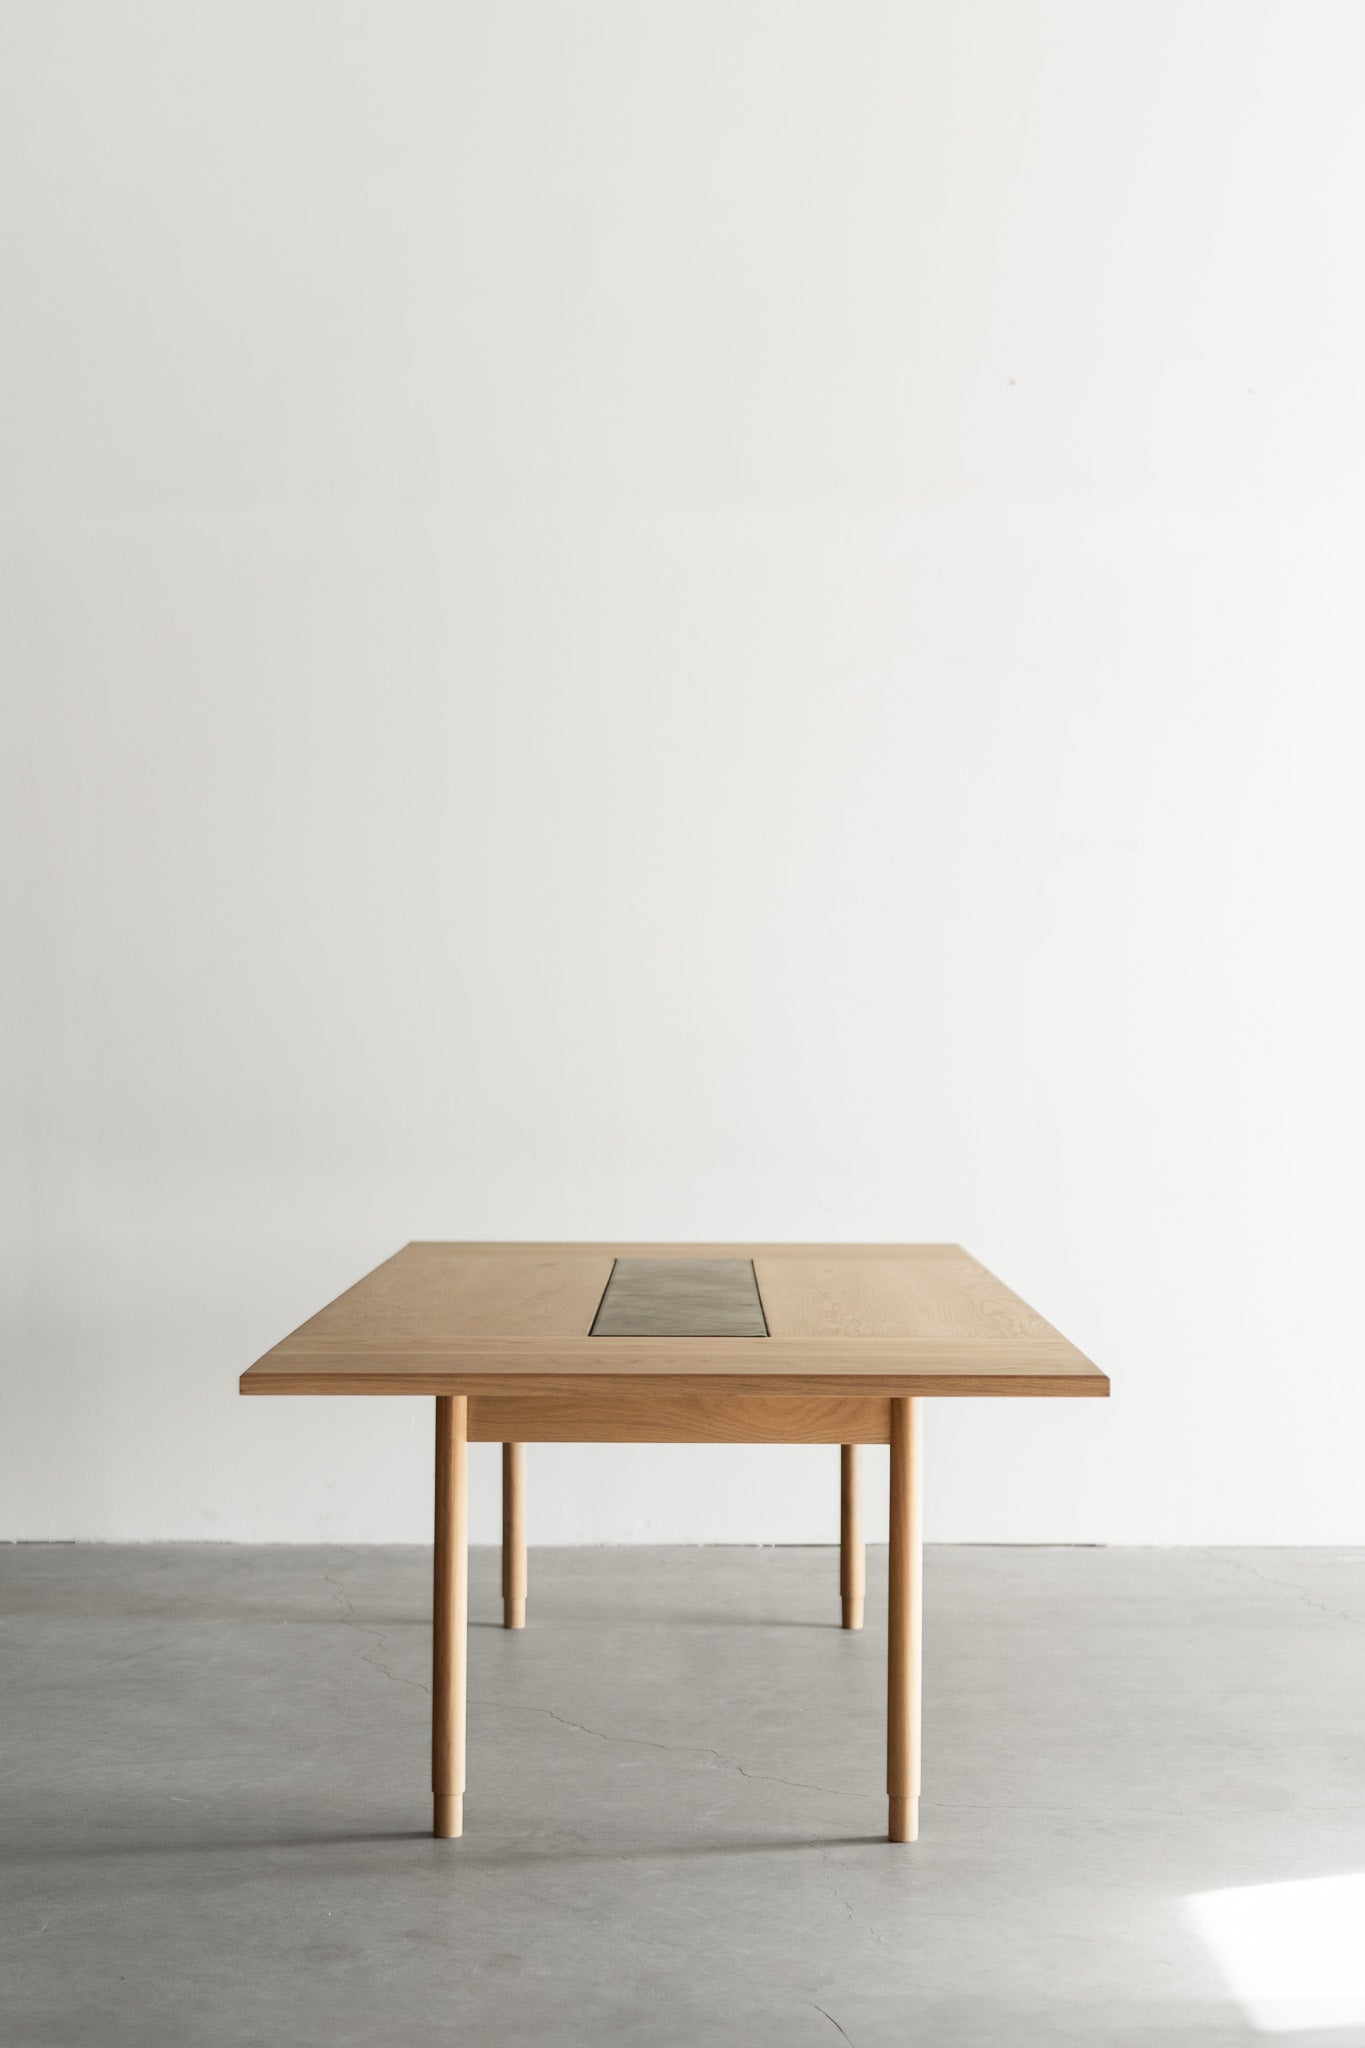 Cleo Dining Table